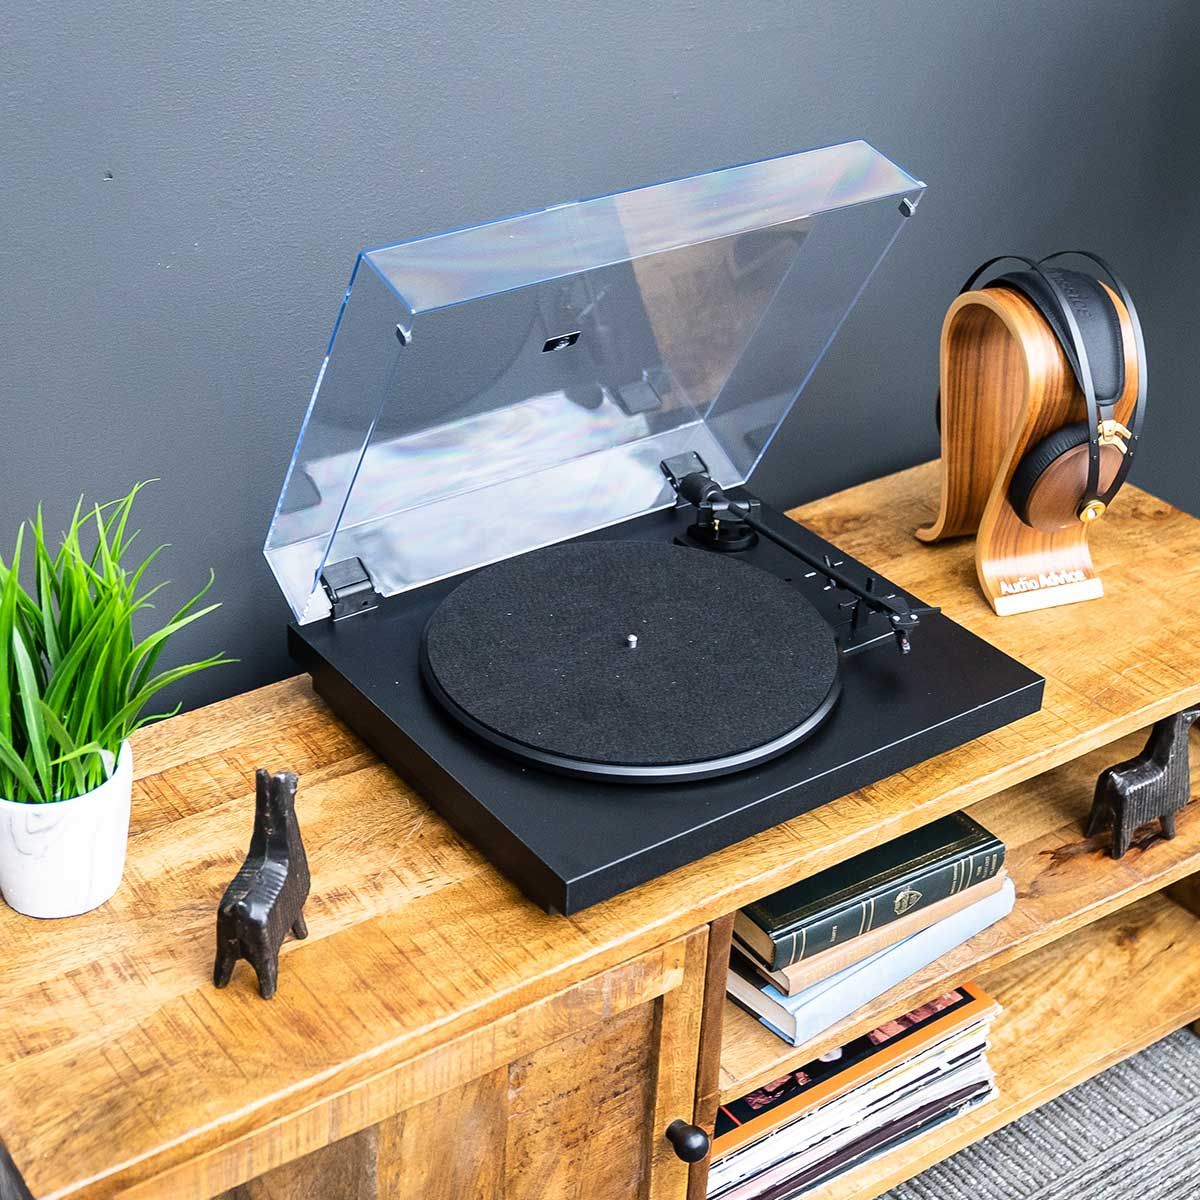 Pro-Ject Automat A1 Turntable sitting on cabinet with dustcover open